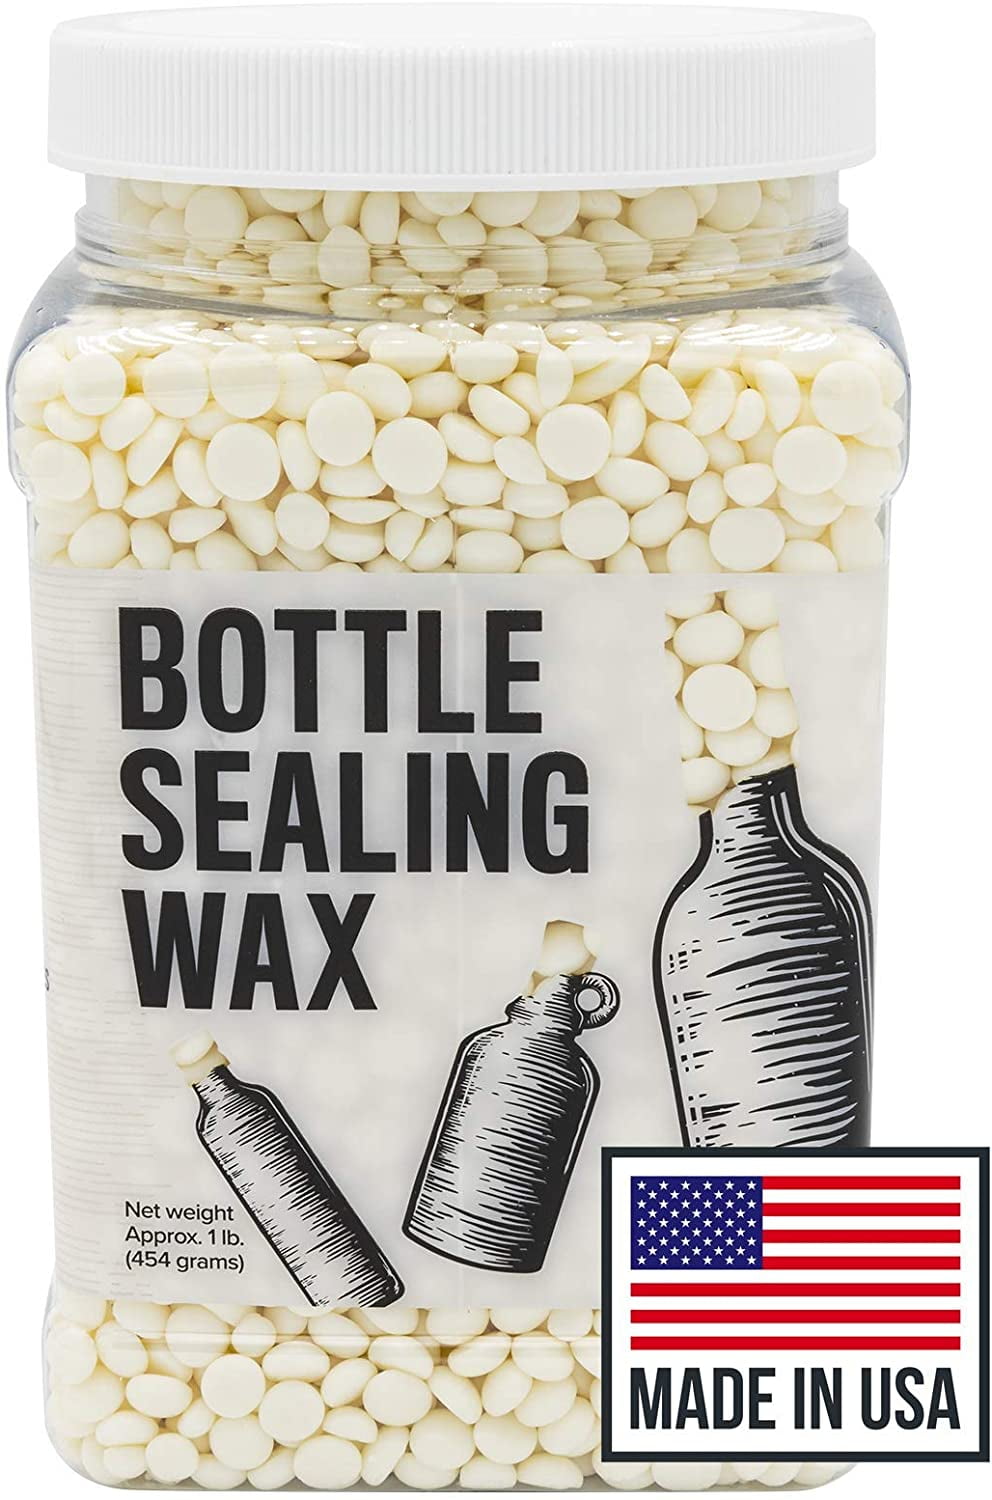 Blended Waxes, Inc. Bottle Sealing Wax 1 lb. Pastilles - Resilient and  Versatile Bottling Wax For Wine, Beer, and Liquor Bottle Sealing - Seals  Between 25-30 Bottles (White) 